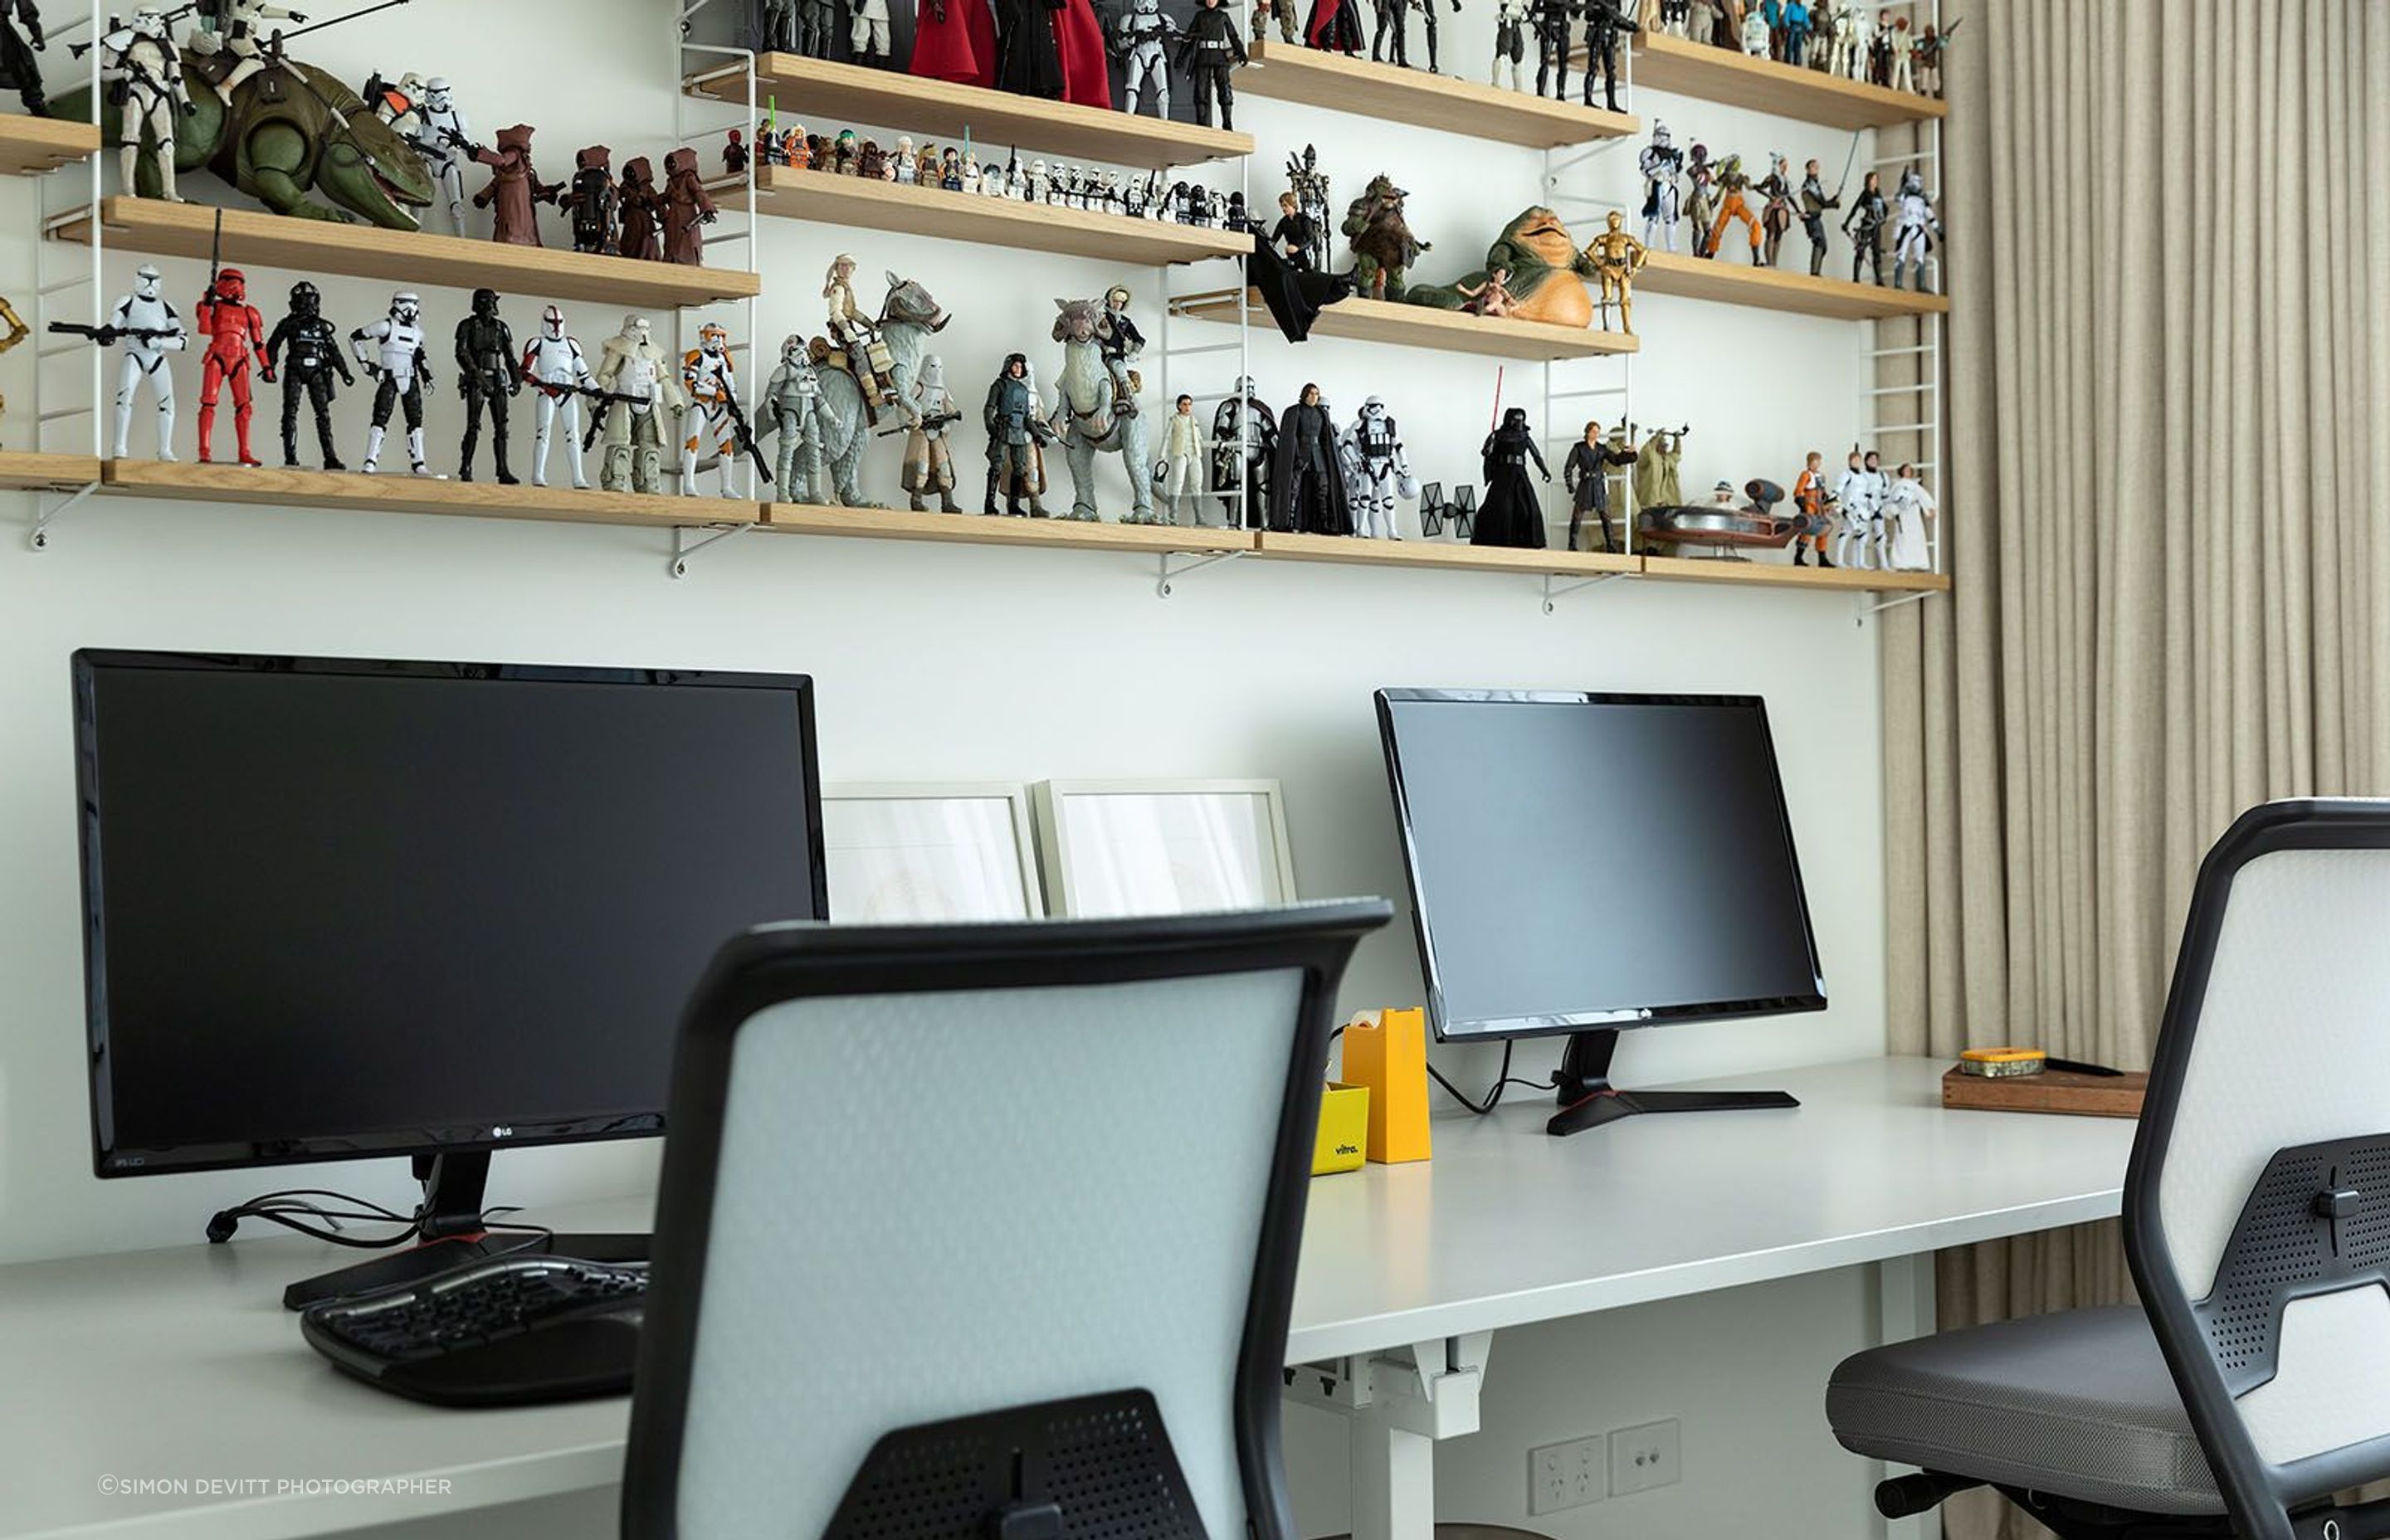 Working from home has never seemed so good. Dedicated work spaces add the bonus of being able to individualise your interior decoration with Star Wars figurines – or whatever takes your fancy. Photographs (above and below) by Simon Devitt.